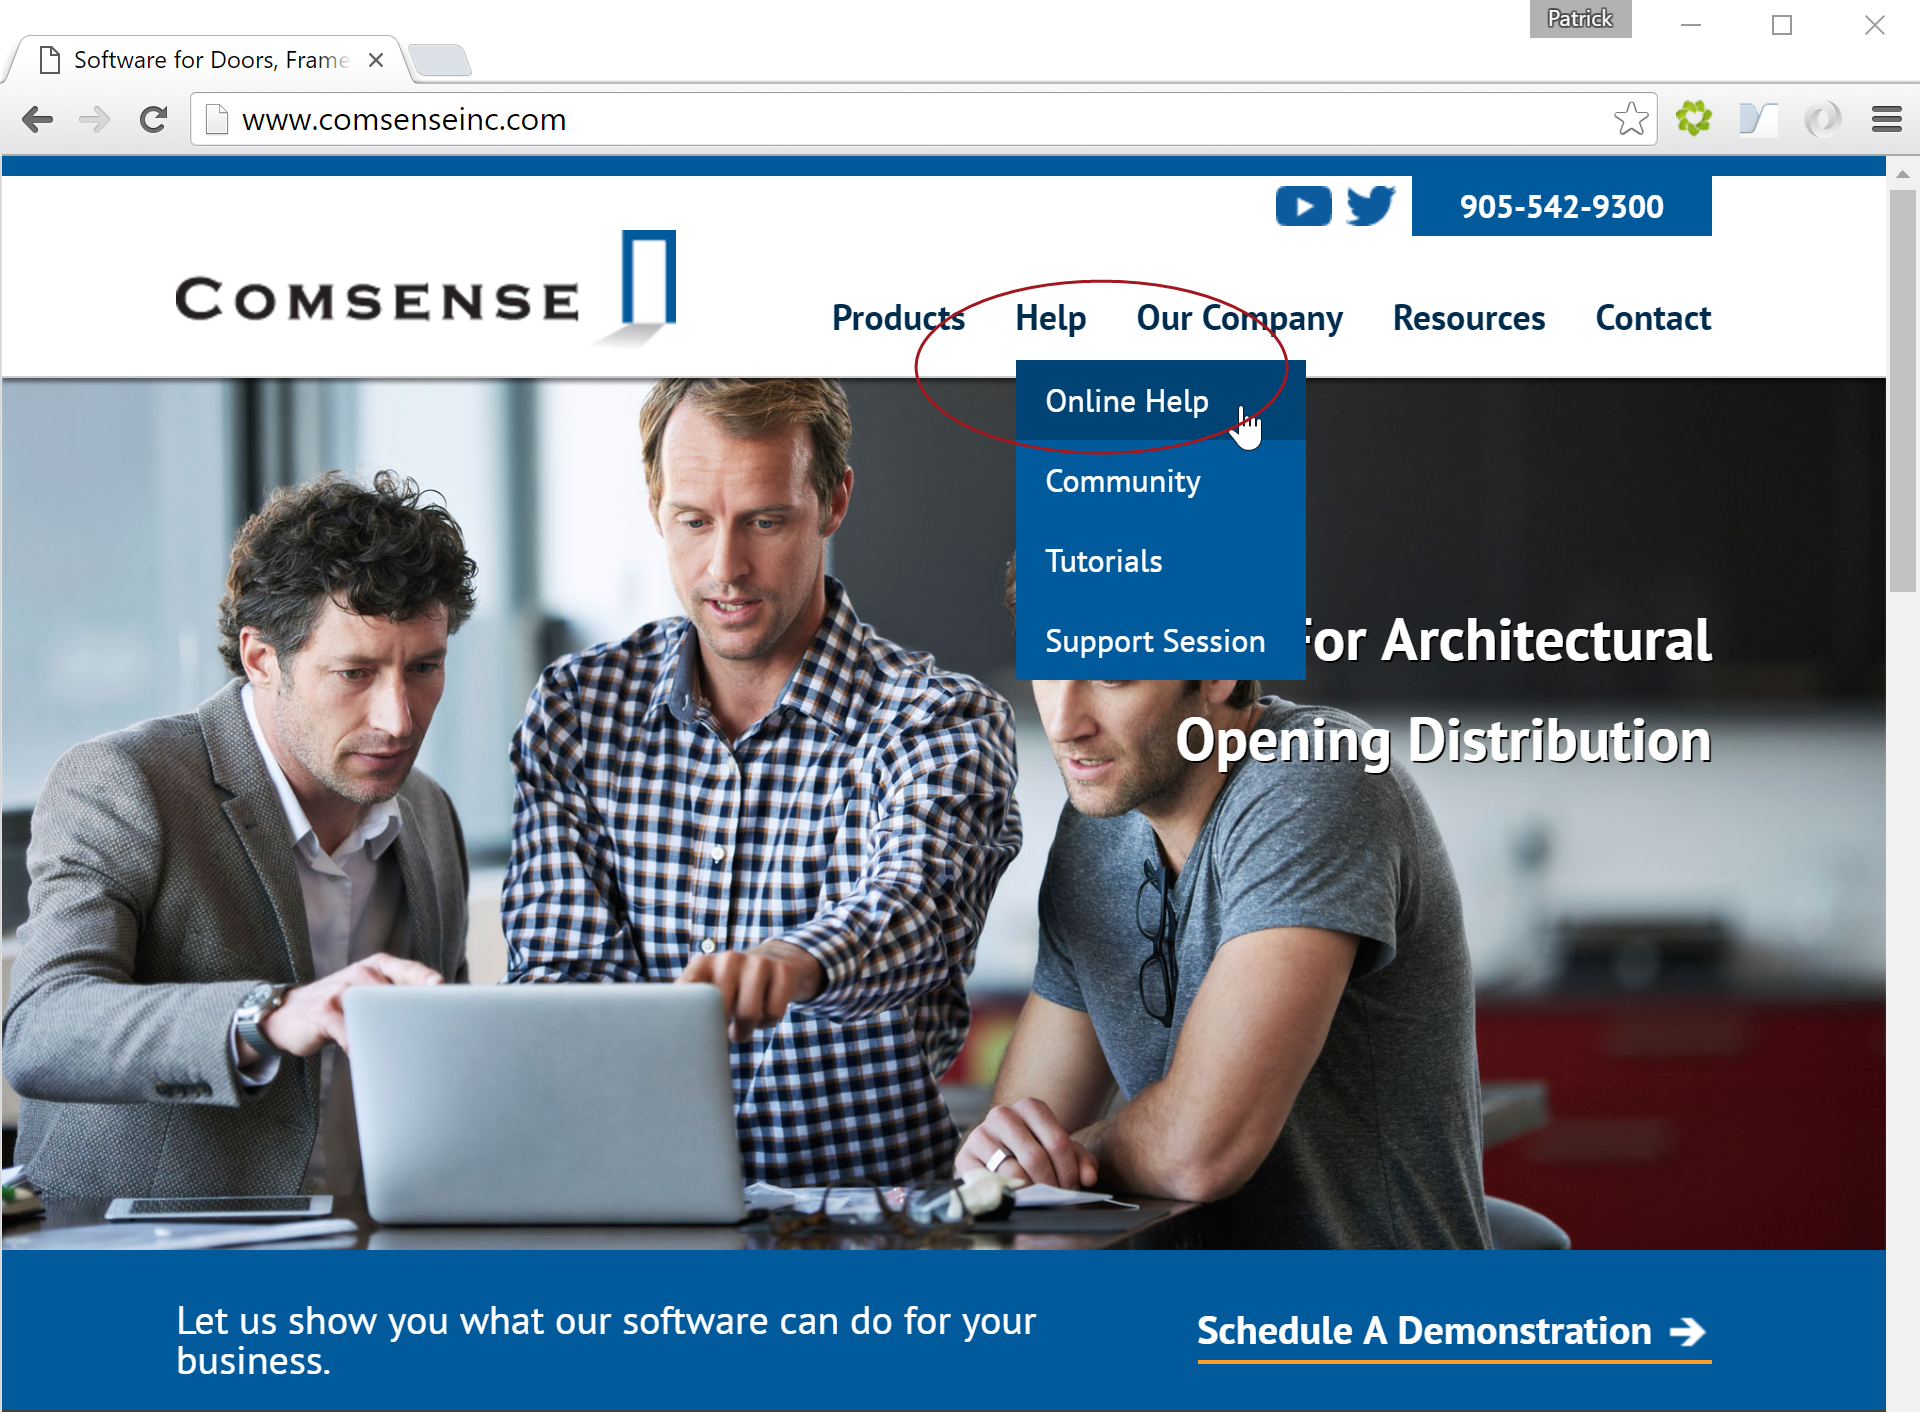 Comsense website; shows the Help drop-down and the location of Online Help.